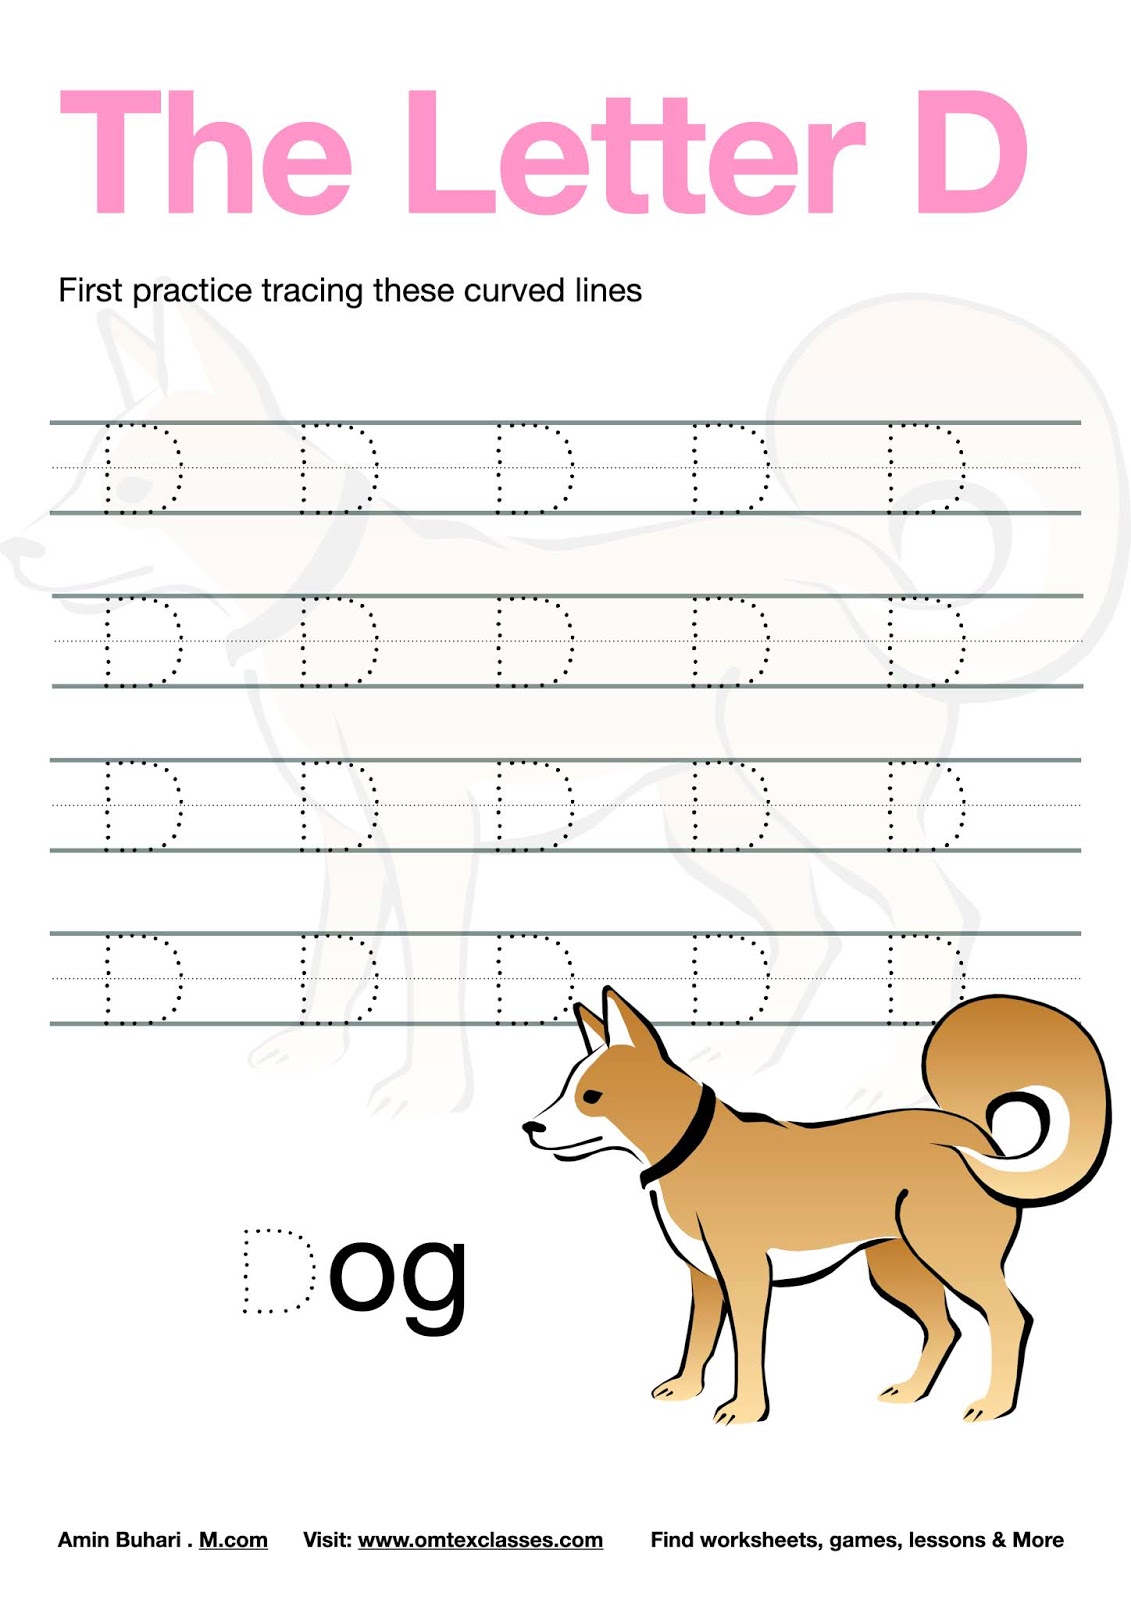 OMTEX CLASSES: Practice Tracing The Letter D Free Download.